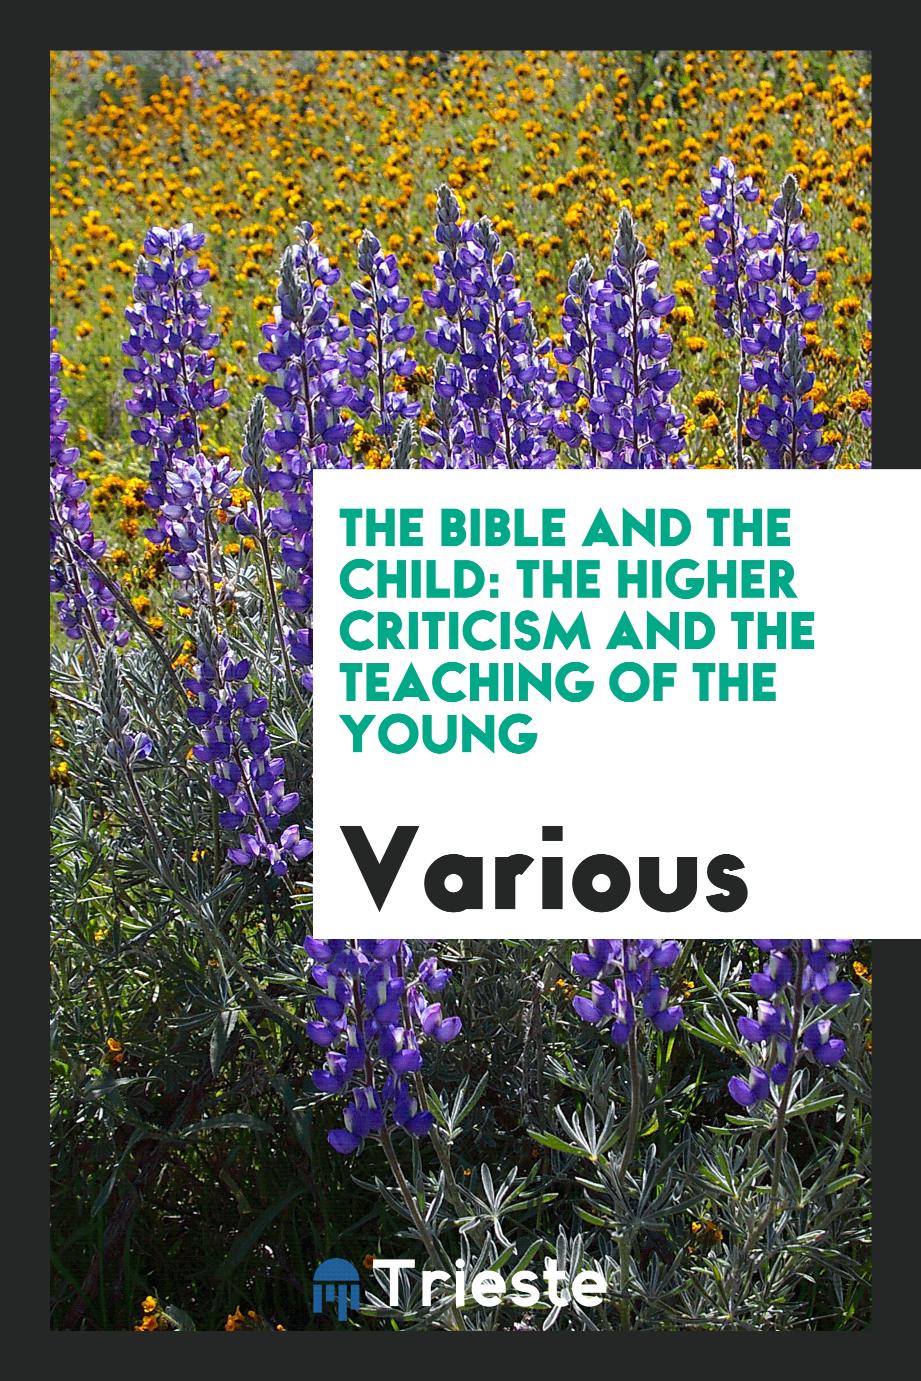 The Bible and the Child: The Higher Criticism and the Teaching of the Young